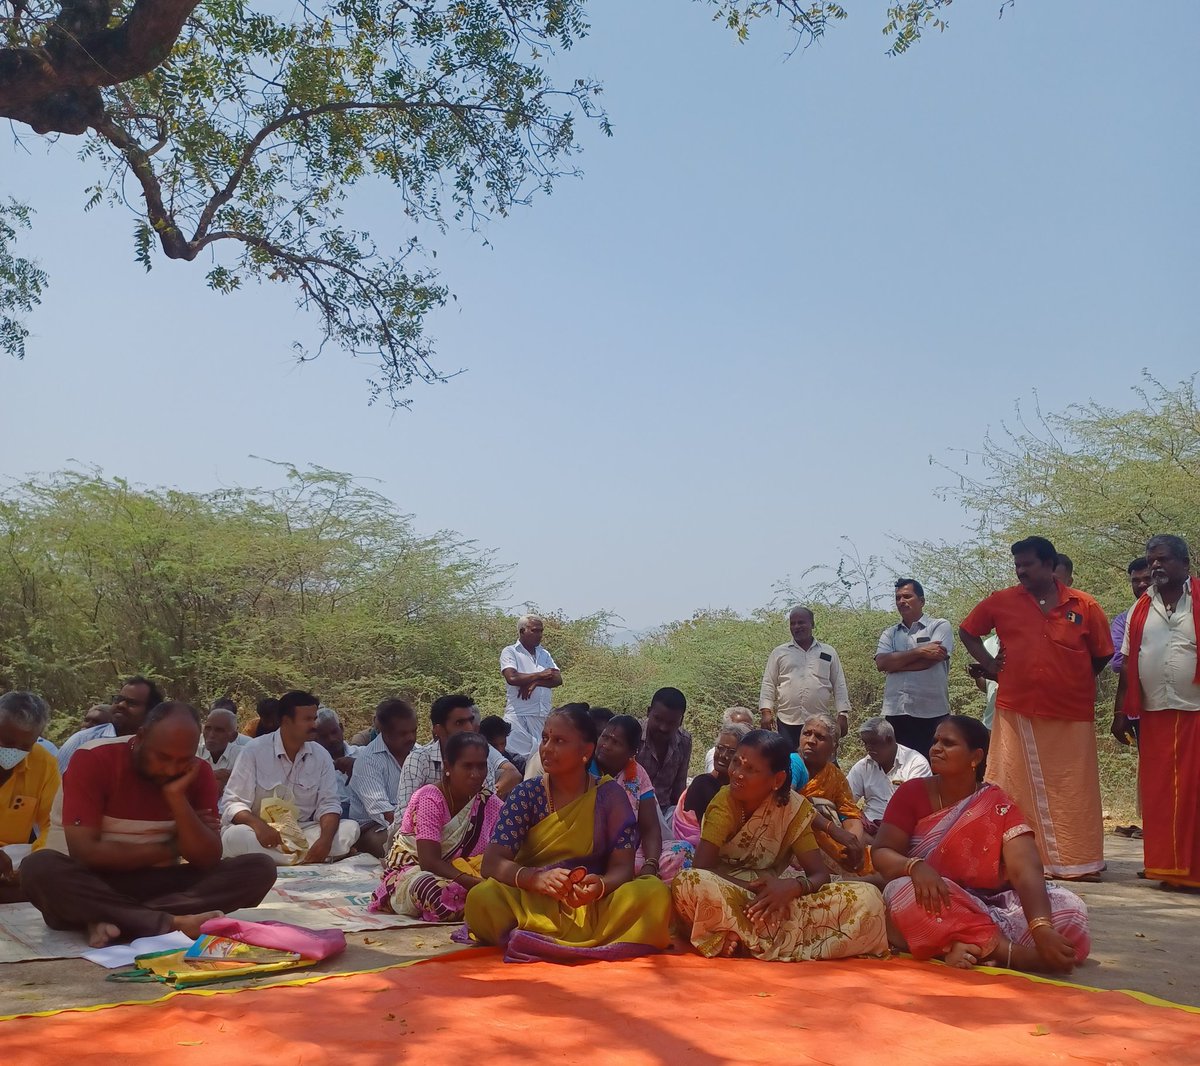 At a farmers meet near Tiruvanamalai, Women's day was celebrated on March 5 (monthly meet). A farmer (woman) asked: 'Have you shared your inherited land with your sisters & daughters? Have you registered land in your wife's name? If not, don't ask why there are so few women here'